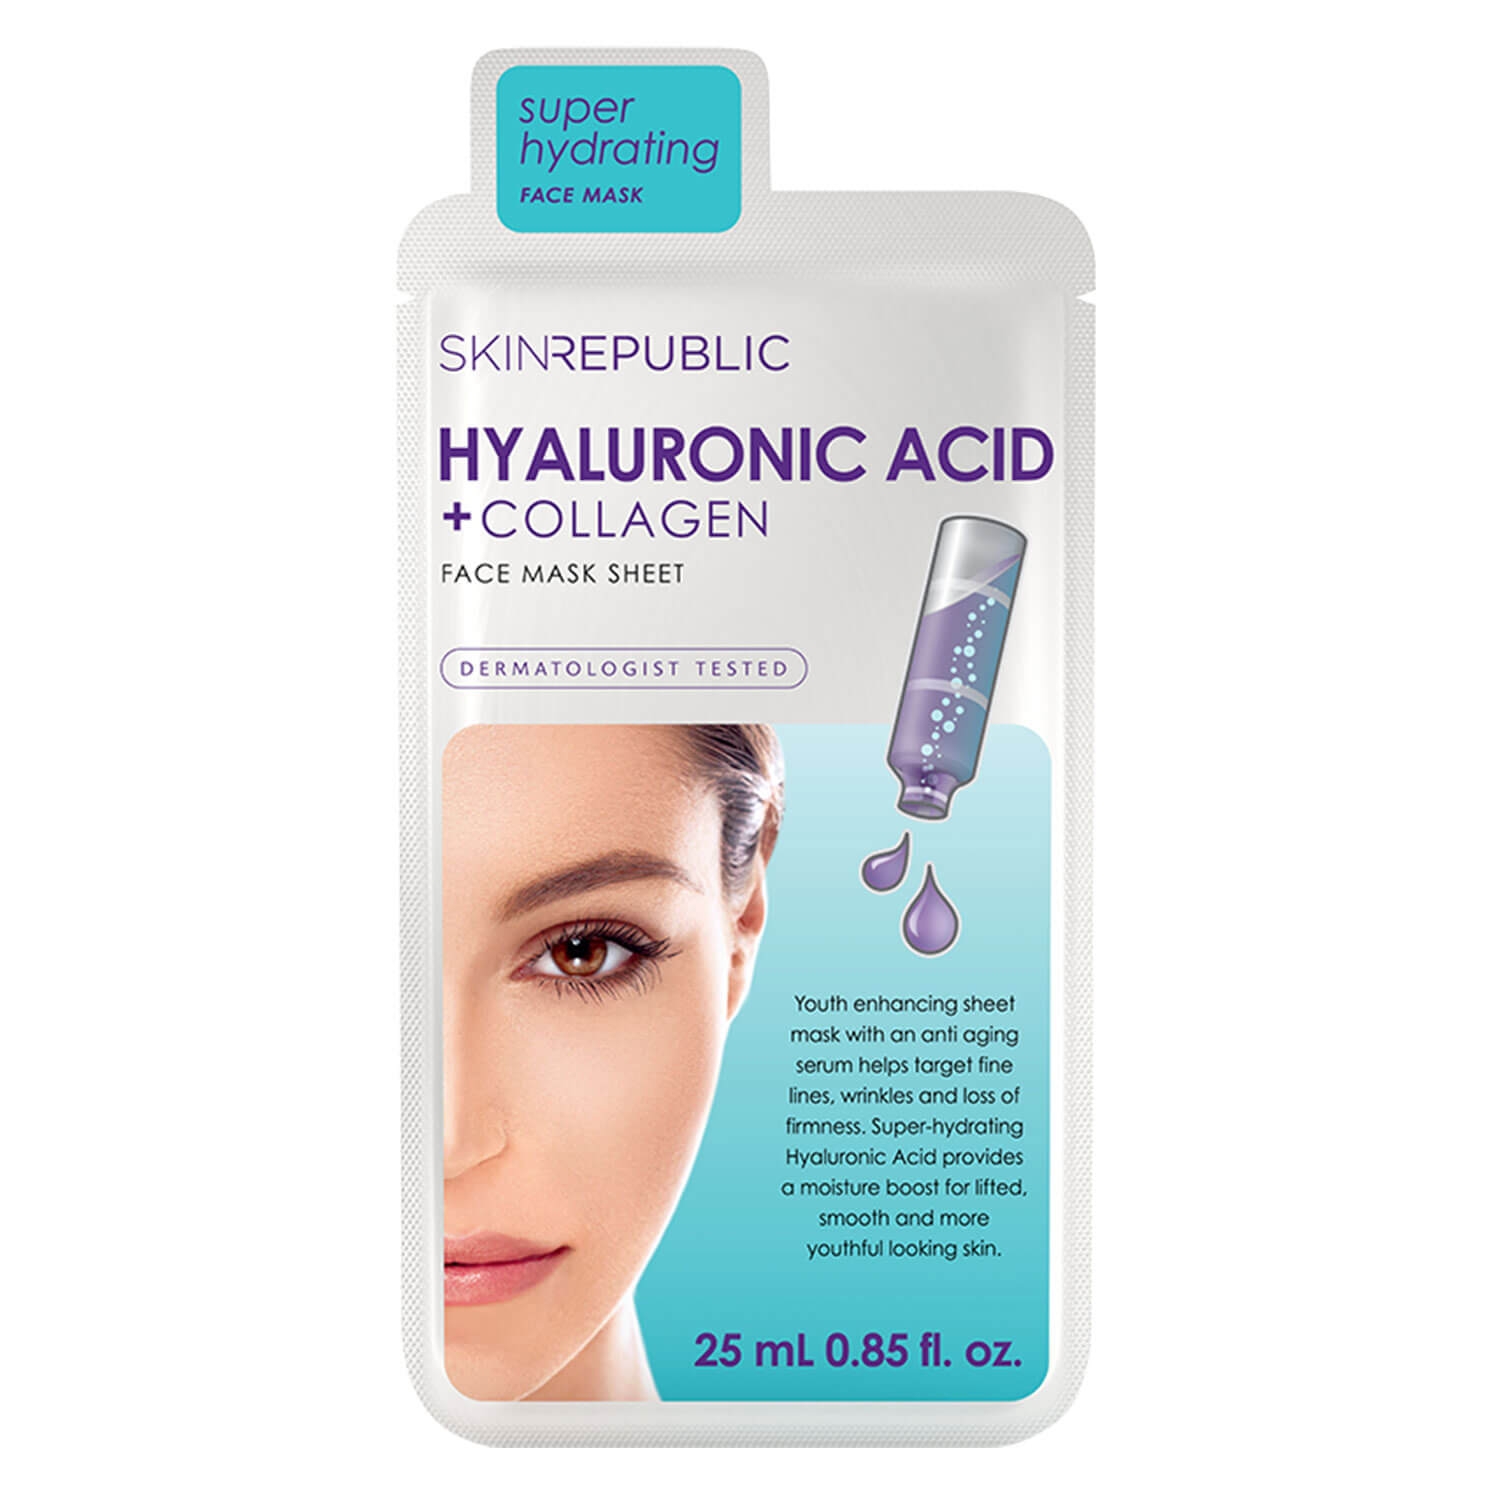 Product image from Skin Republic - Hyaluronic Acid + Collagen Face Mask